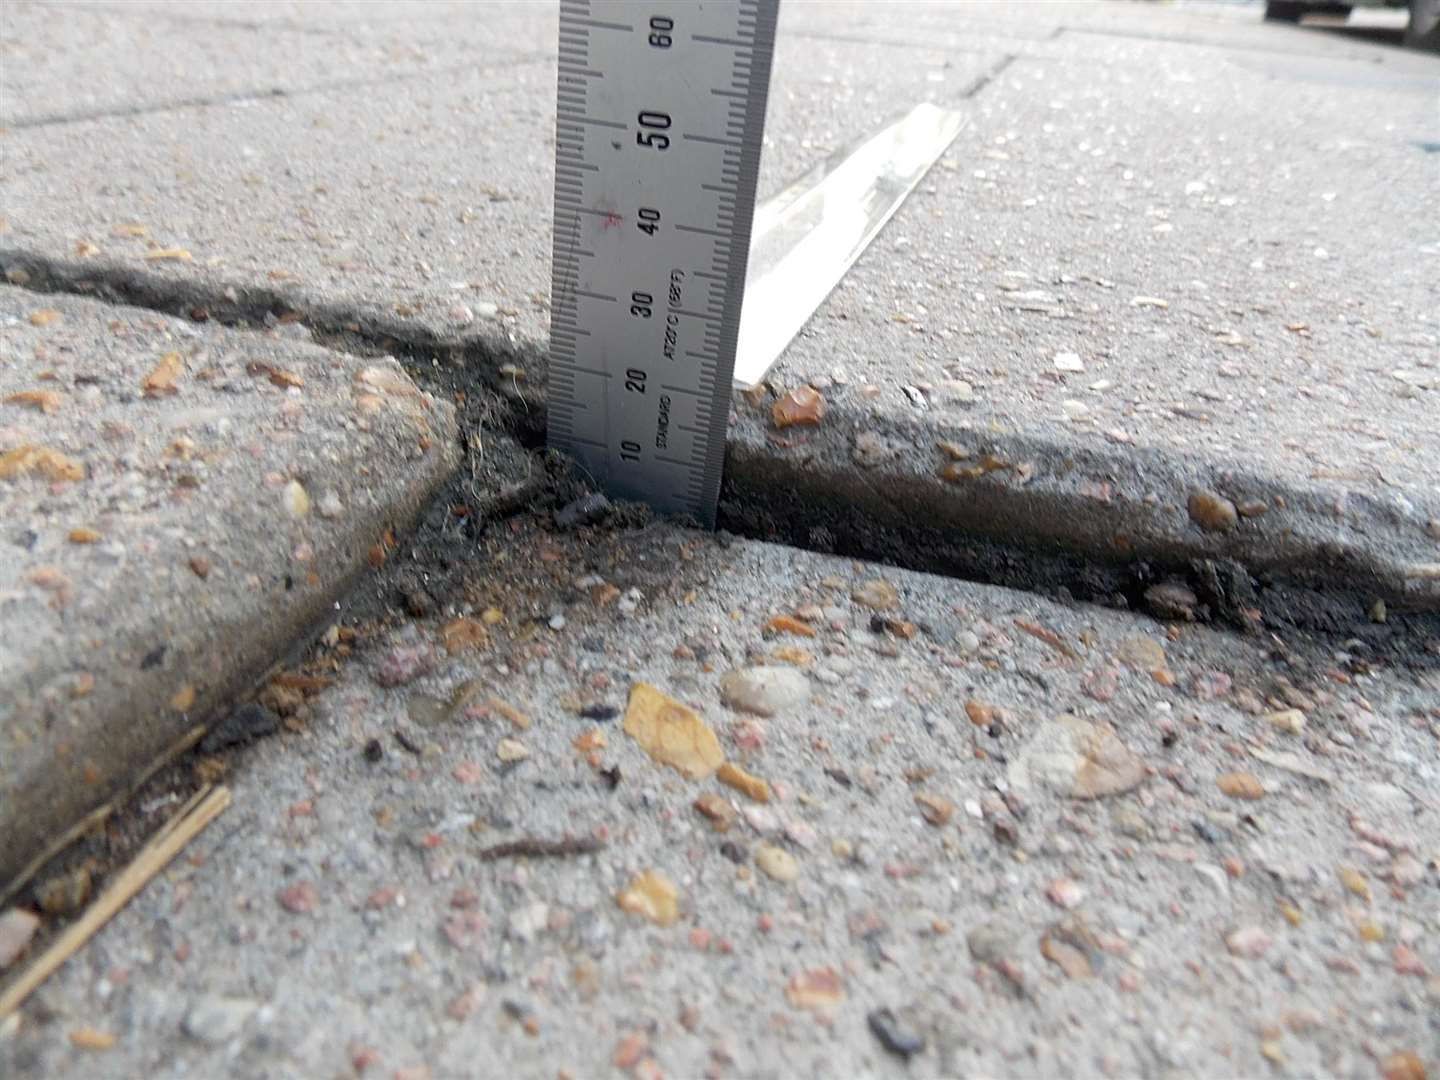 The gap in the paving stone was measured at 22mm (6999041)